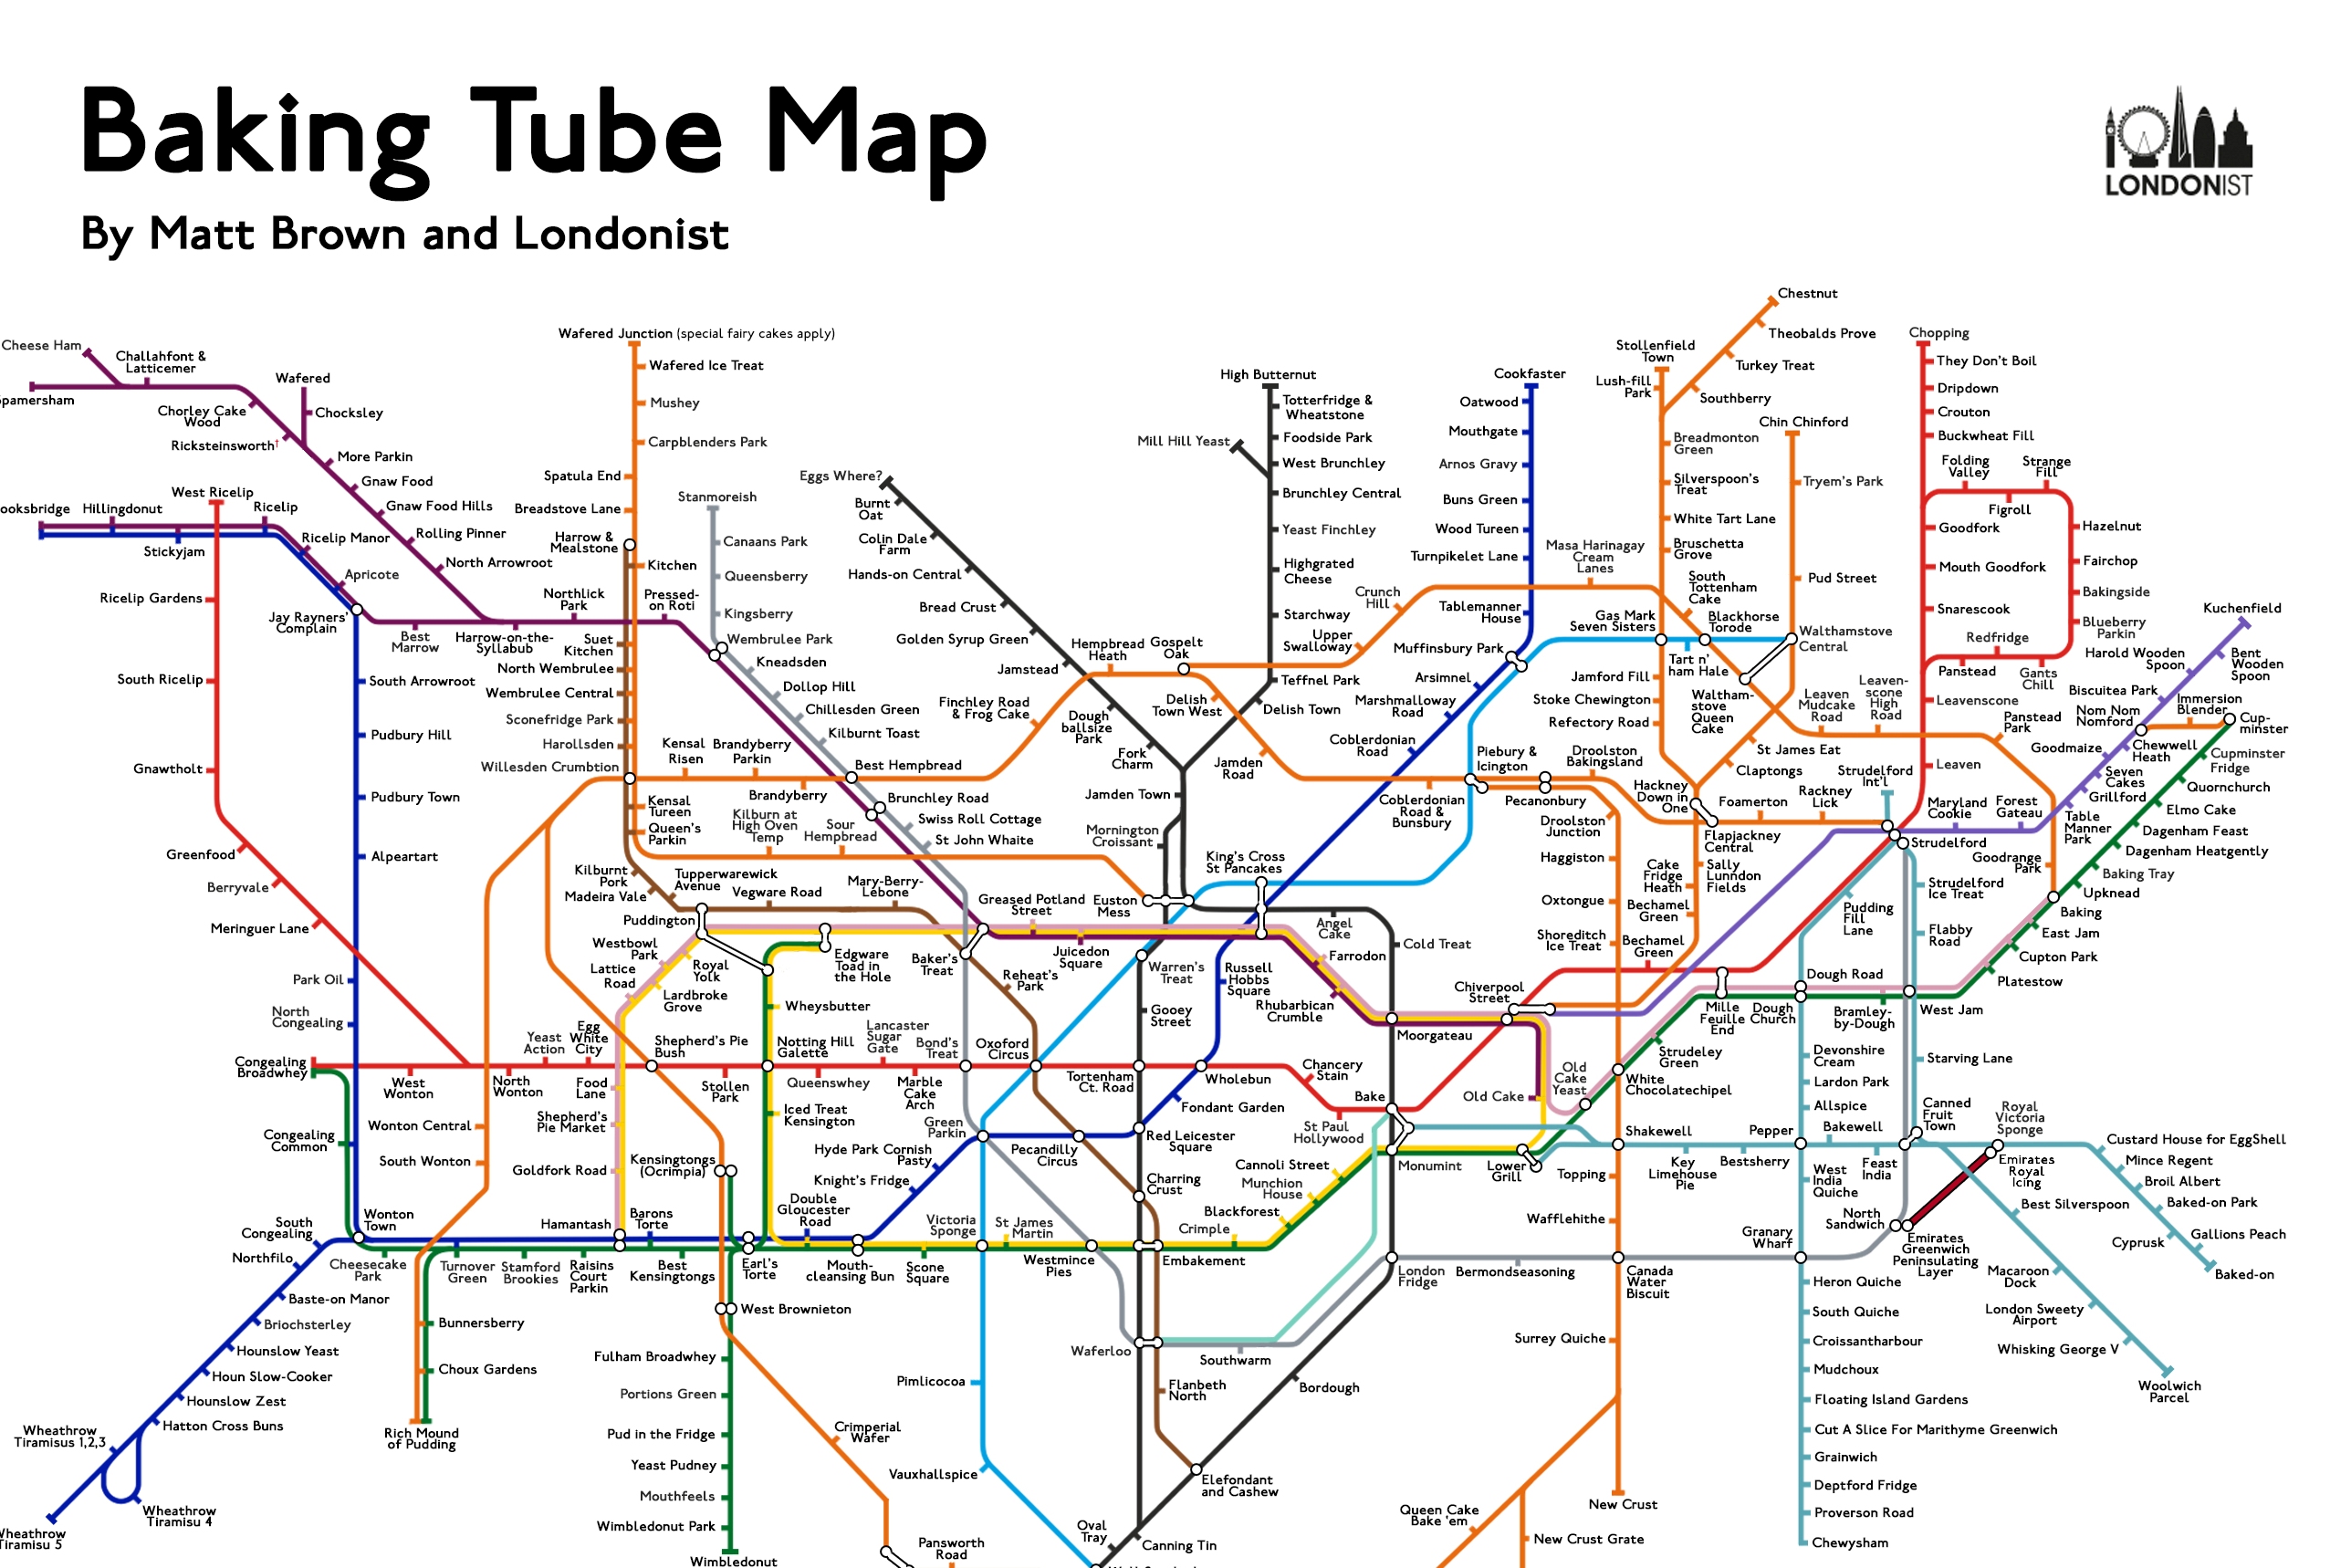 The Baker's Tube Map / Foto: The Londonist